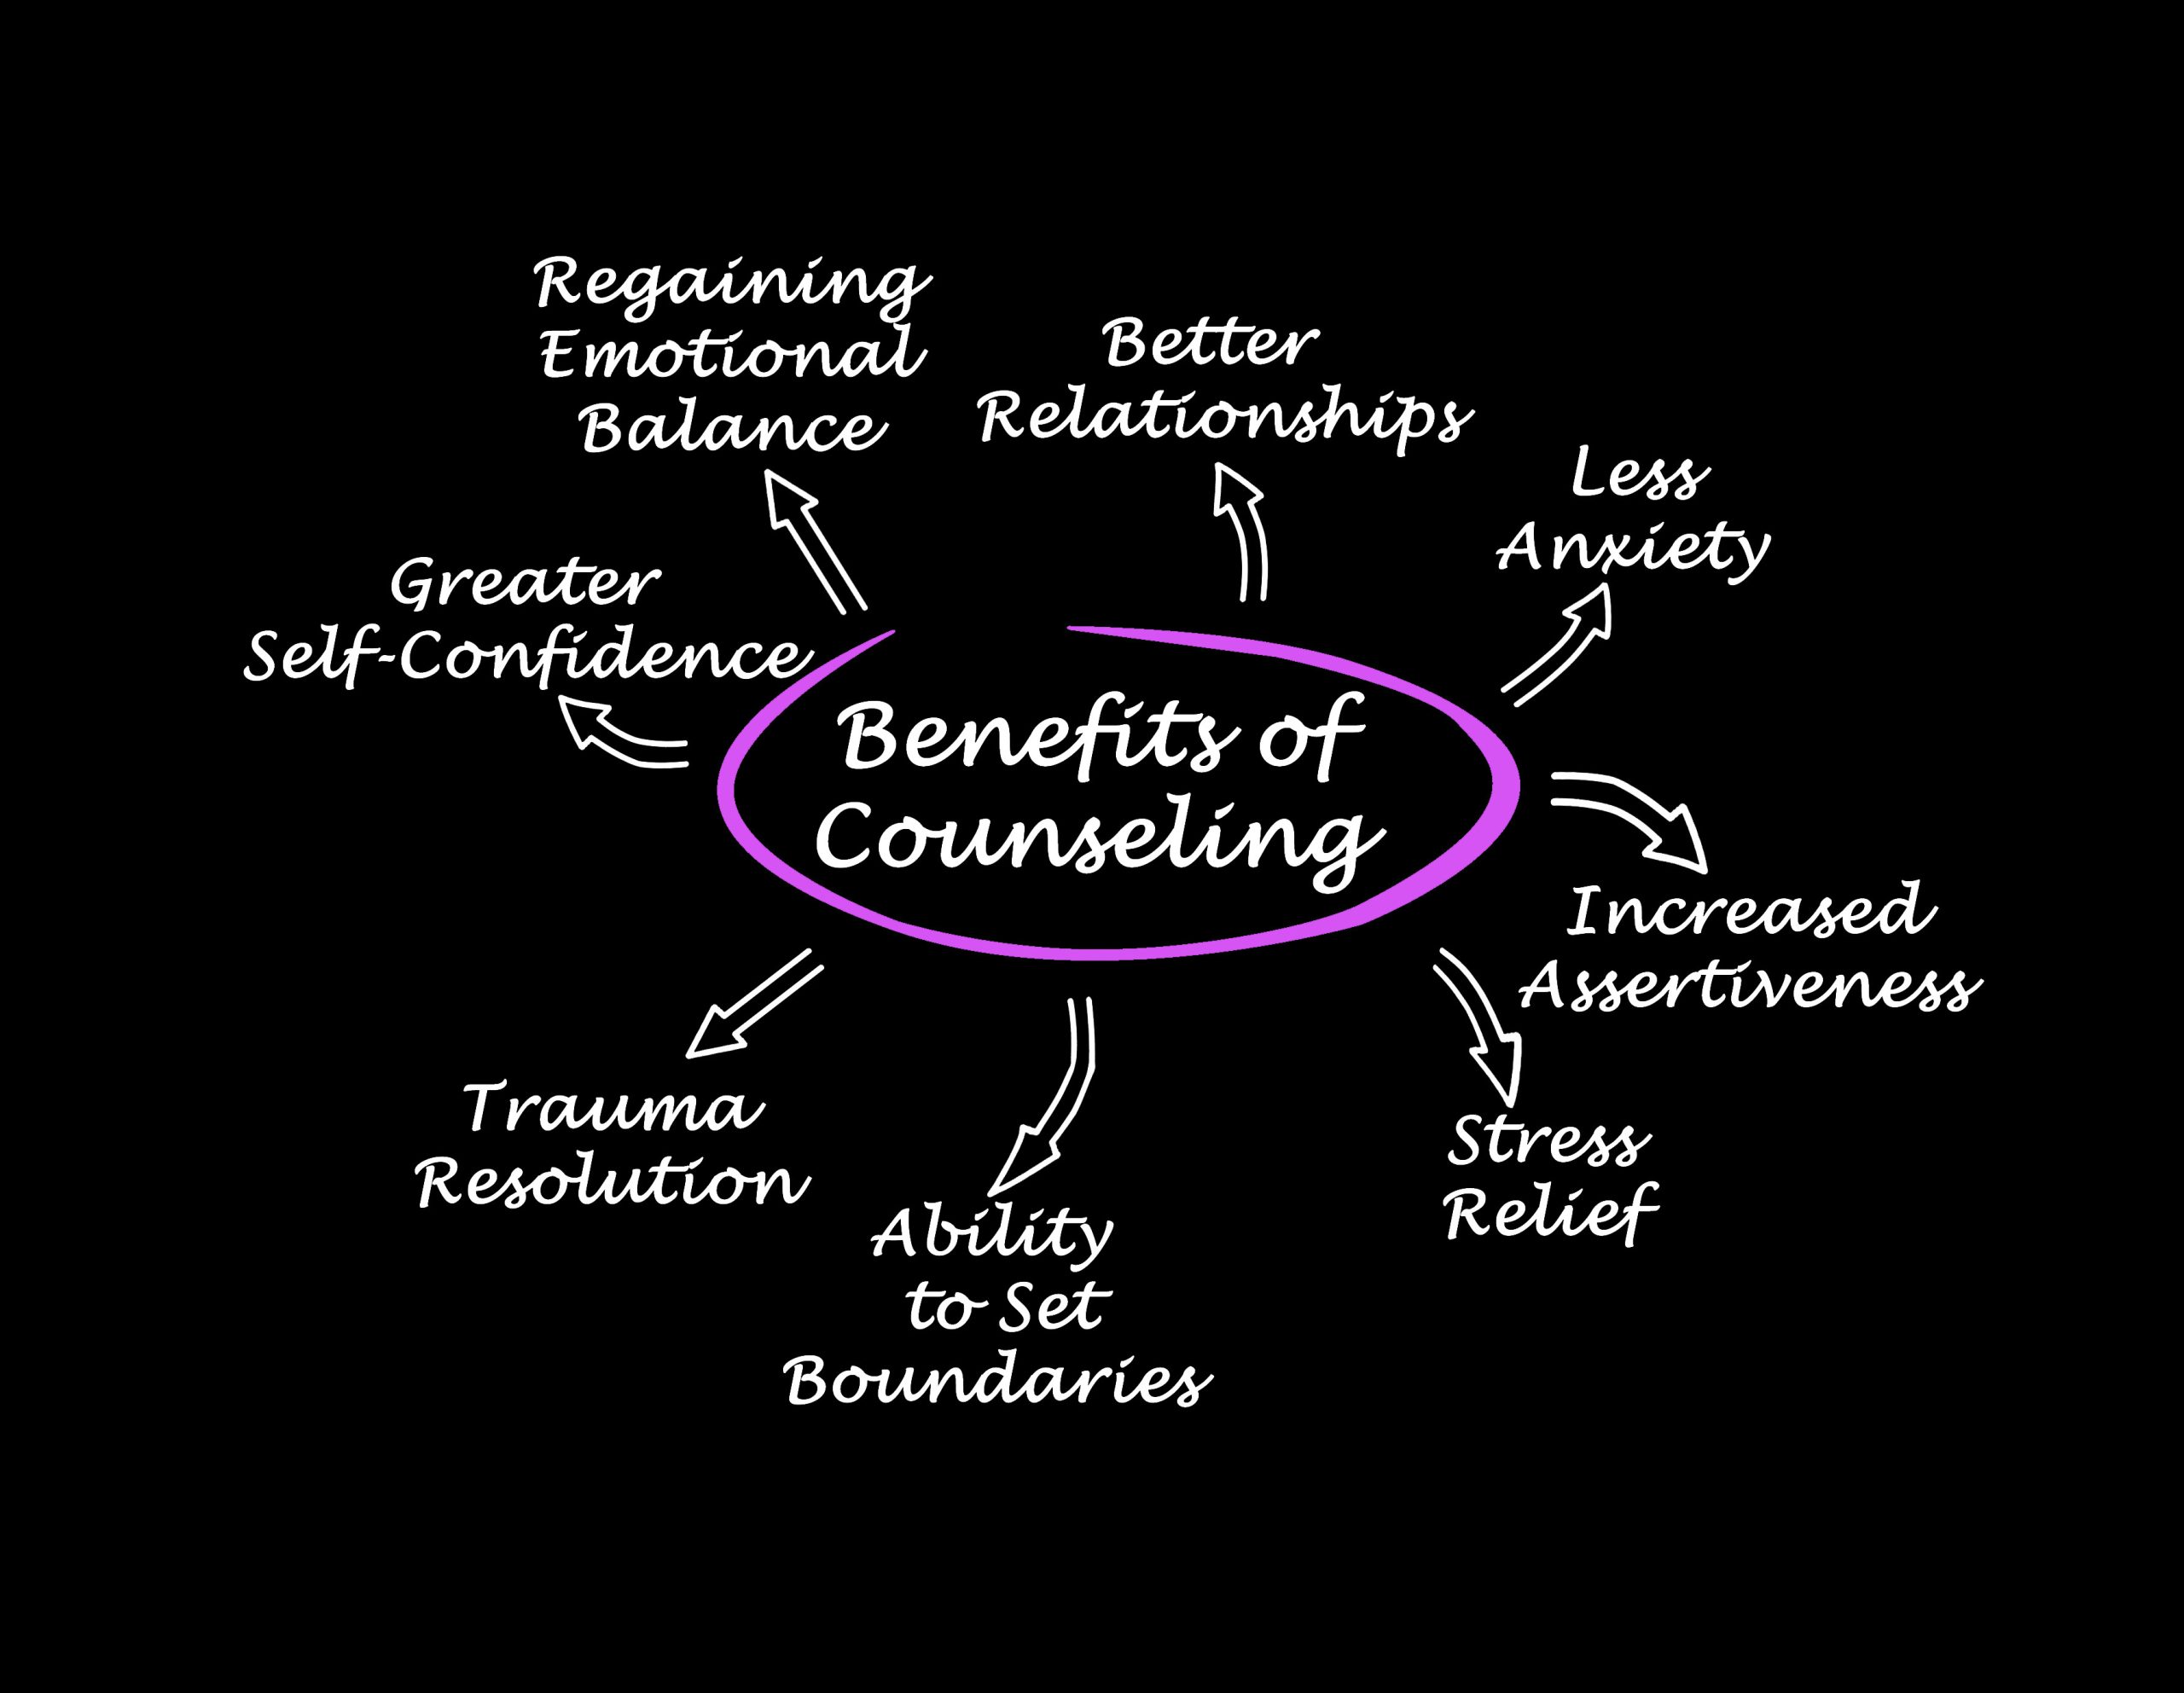 faq - yeghip - What are the benefits of Counselling?